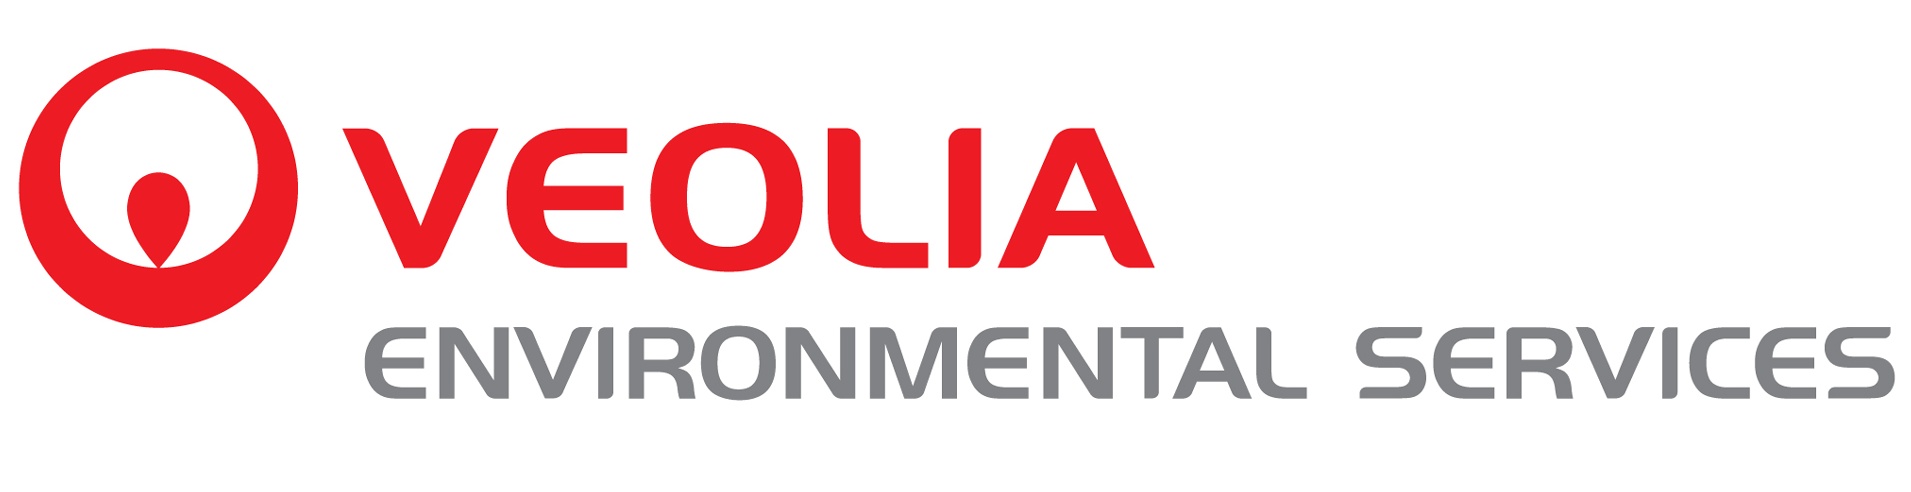 veolia rebranding of its brand to save the brand